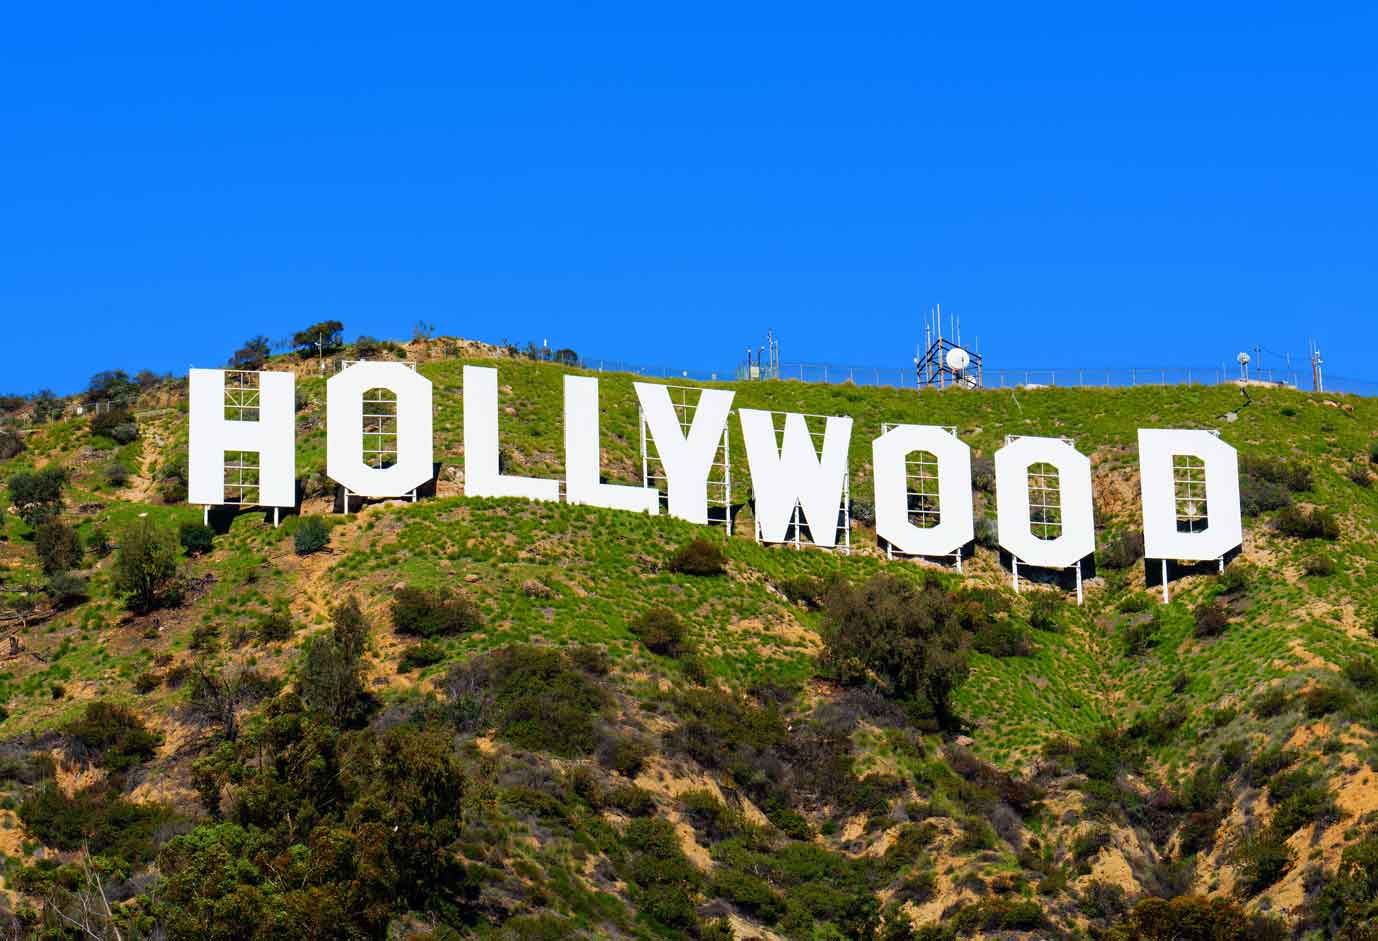 Verticals of Hollywood